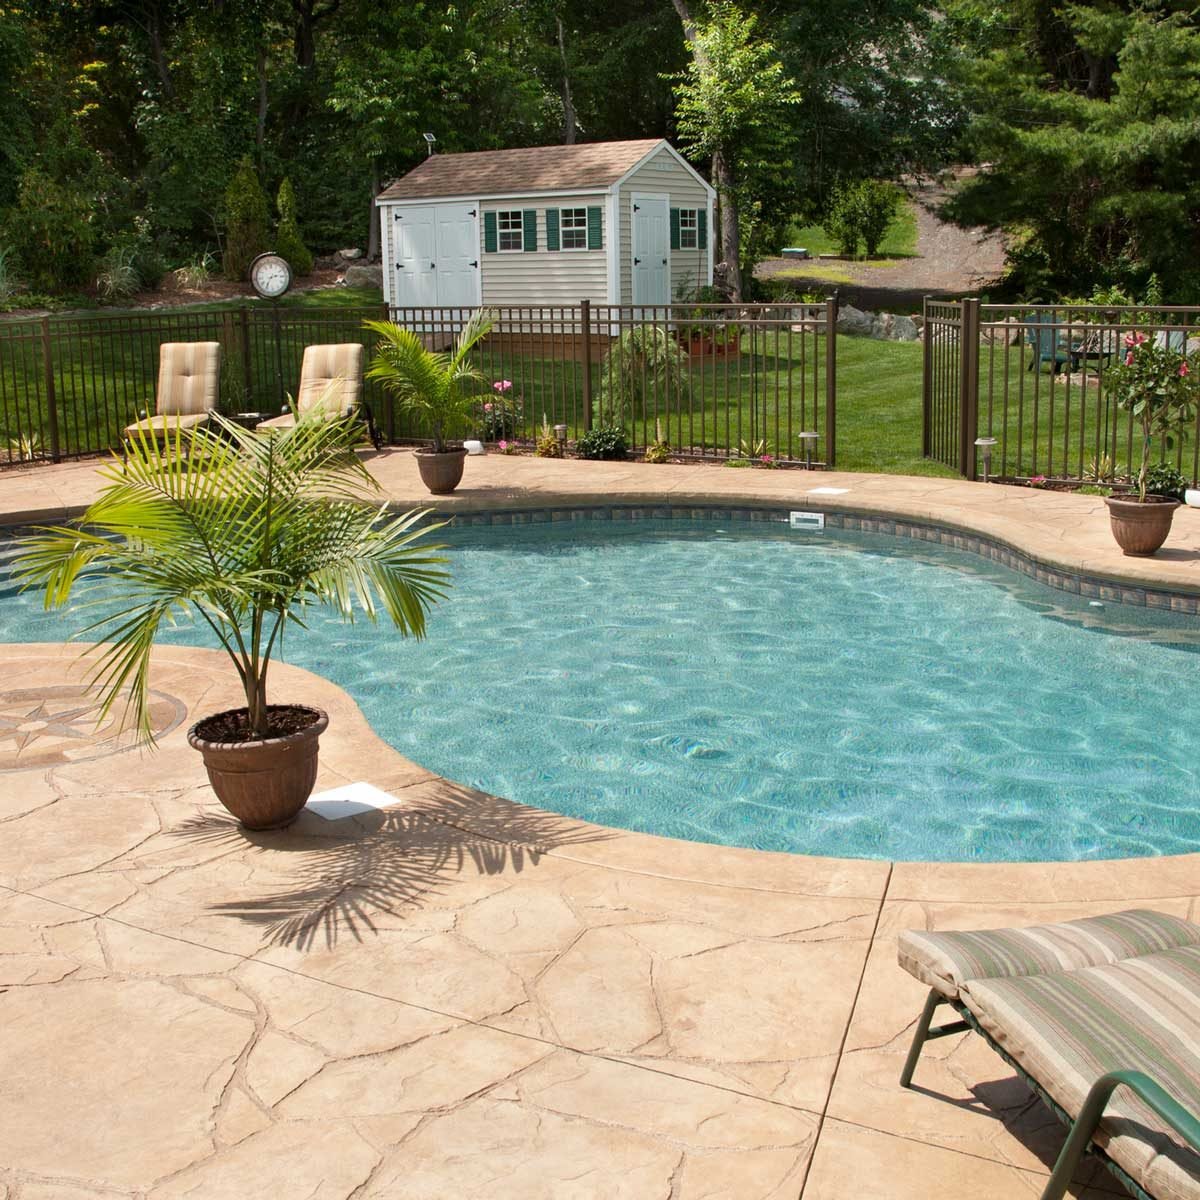 Should I Get a Pool? What to Know Before Taking the Plunge